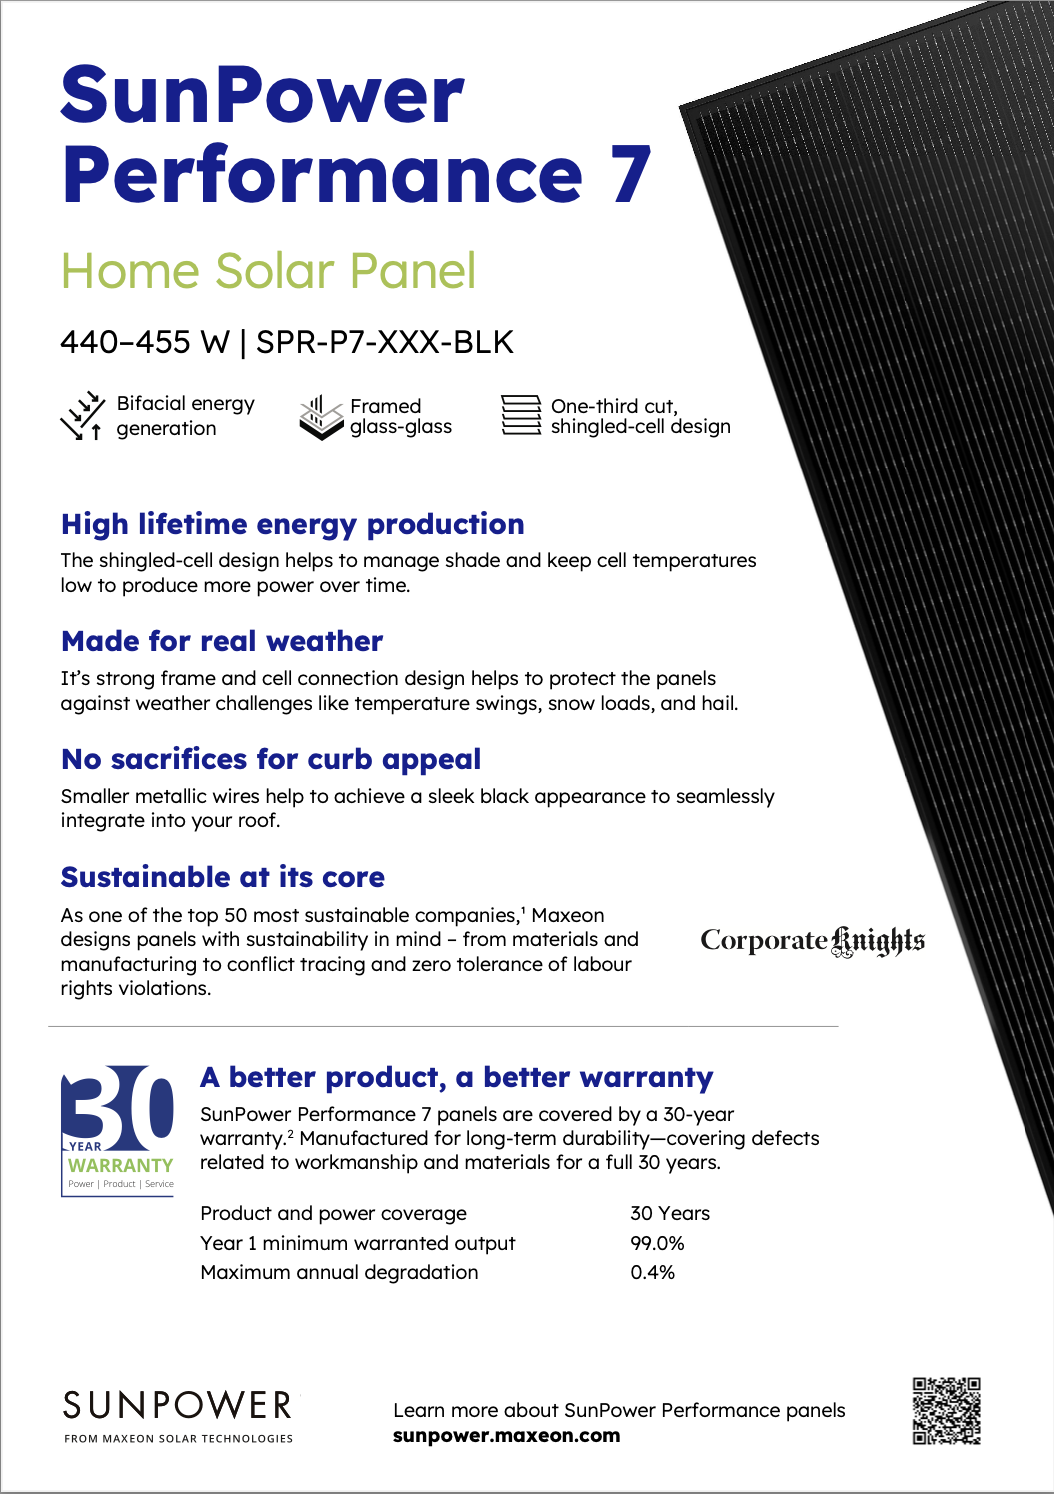 Promotional datasheet for SunPower Performance 7 Home Solar Panel, model SPR-P7-XXX-BLK, with a power range of 440–455W. The image features key highlights such as bifacial energy generation, a framed glass-glass structure, and a one-third cut, shingled-cell design. It emphasizes high lifetime energy production due to its unique cell design, robustness against extreme weather conditions, and a sleek appearance for enhanced curb appeal. The panel is touted for its sustainability and is backed by a 30-year warranty. Details include product features, benefits, and a QR code linking to further information on SunPower’s website.